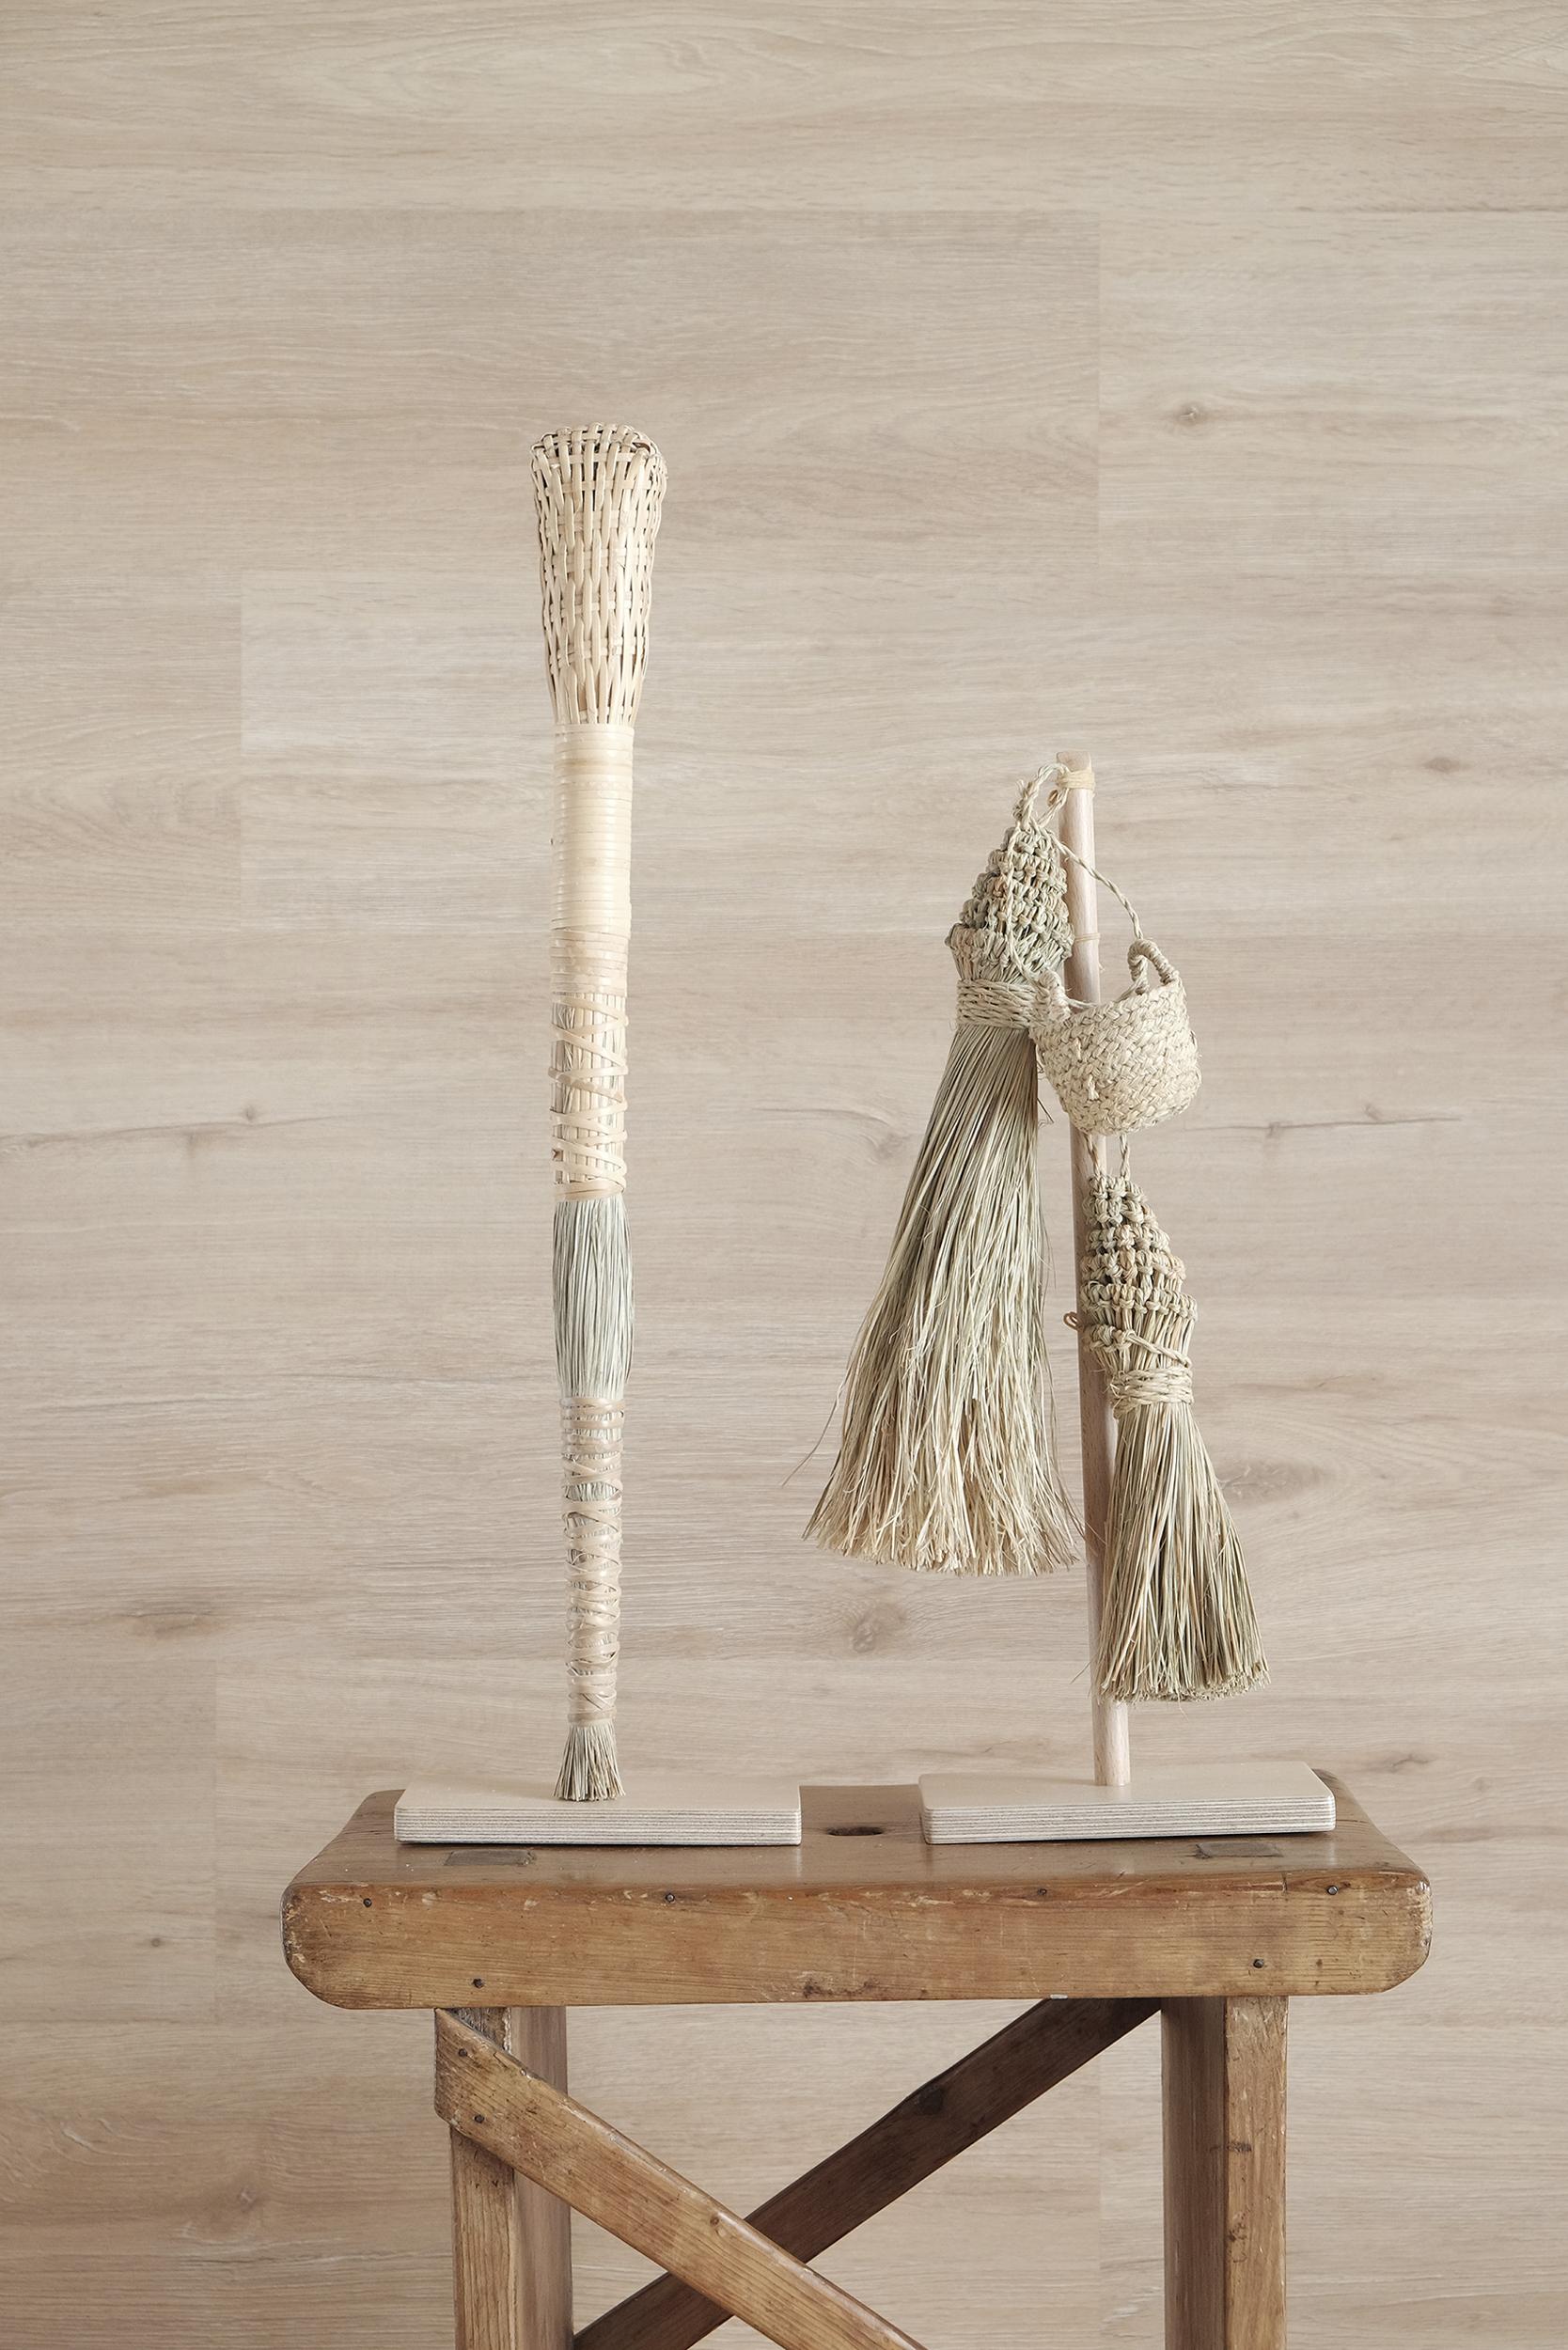 A figurative brooms nd basket artwork crafted in Spain by Gabriela de Sagarminaga. Two historical objects pertaining to the daily tasks performed in our homes to create the right order: cleanliness and personal satisfaction. A Spanish culture